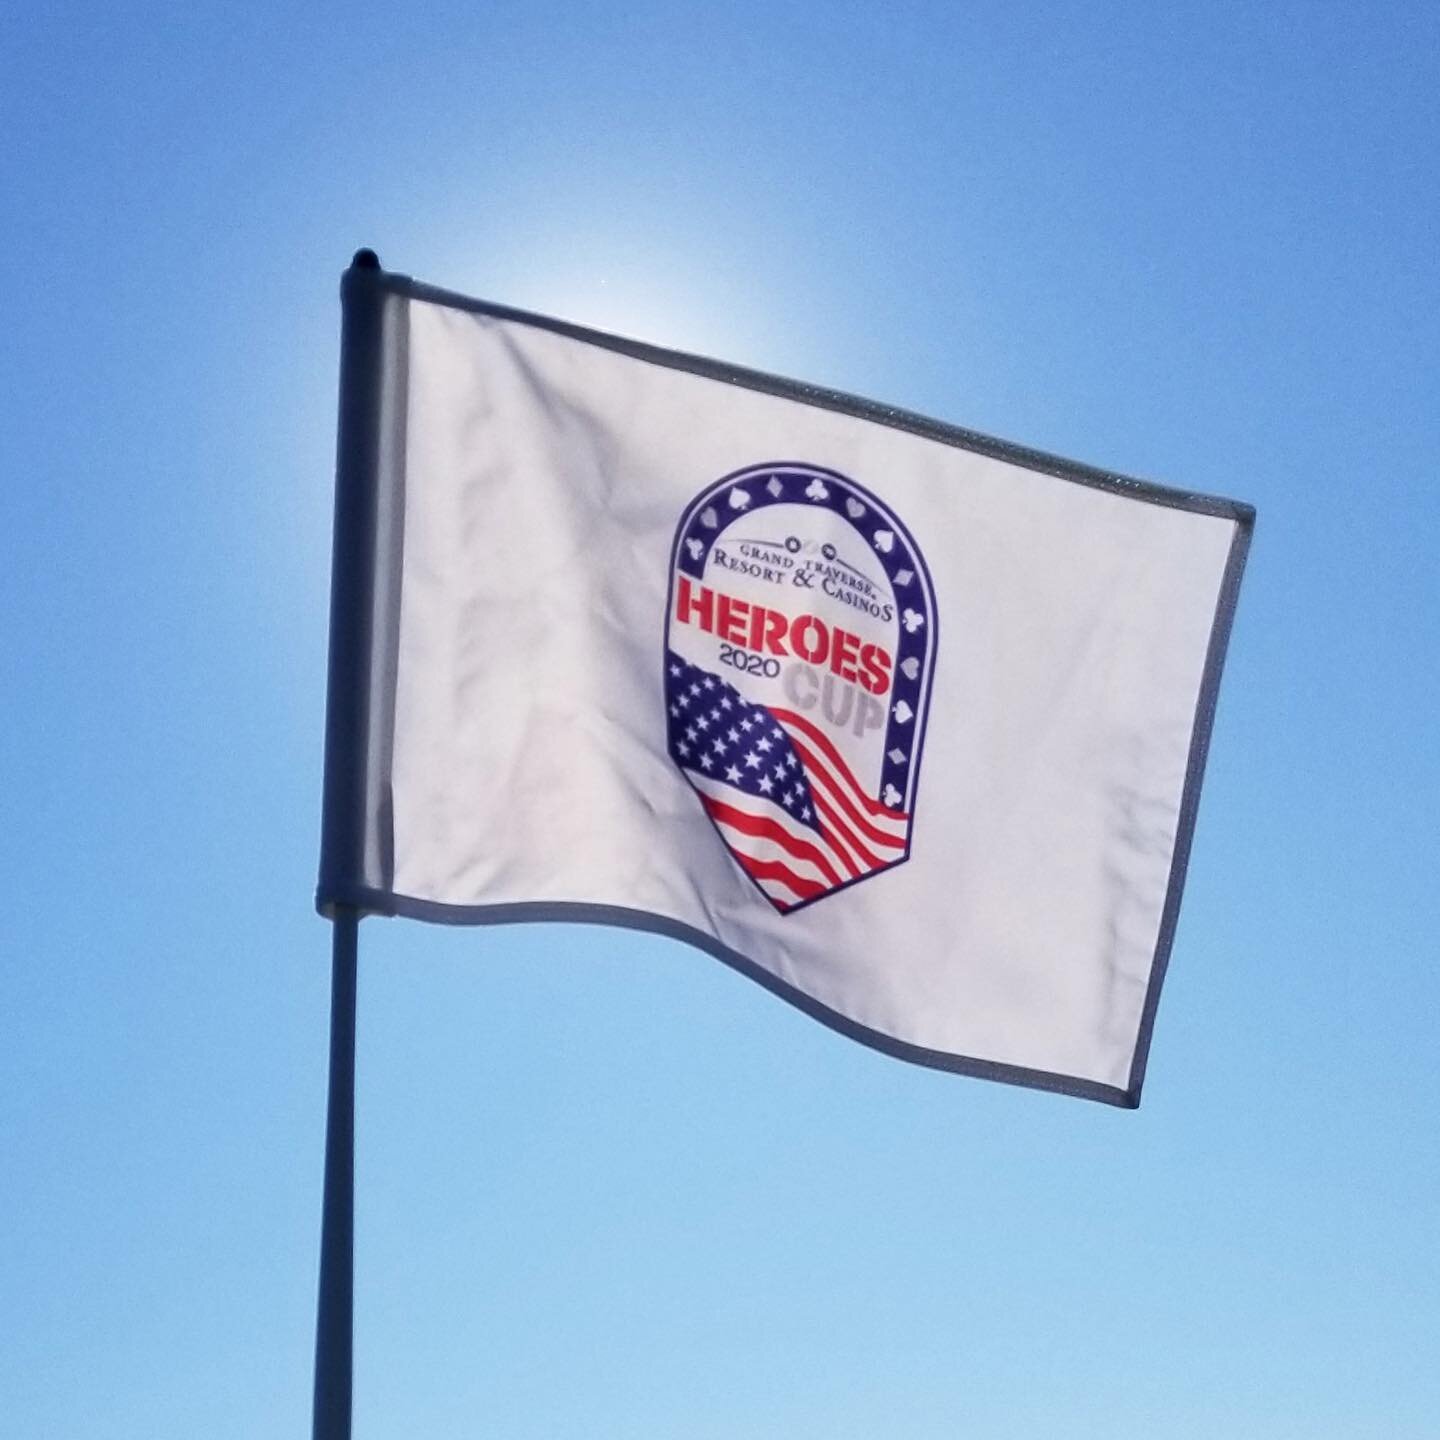 The Heroes Cup Invitational will be here before you know it!
And the flags are ready.
#gtresort #golf #nomi #traversecity